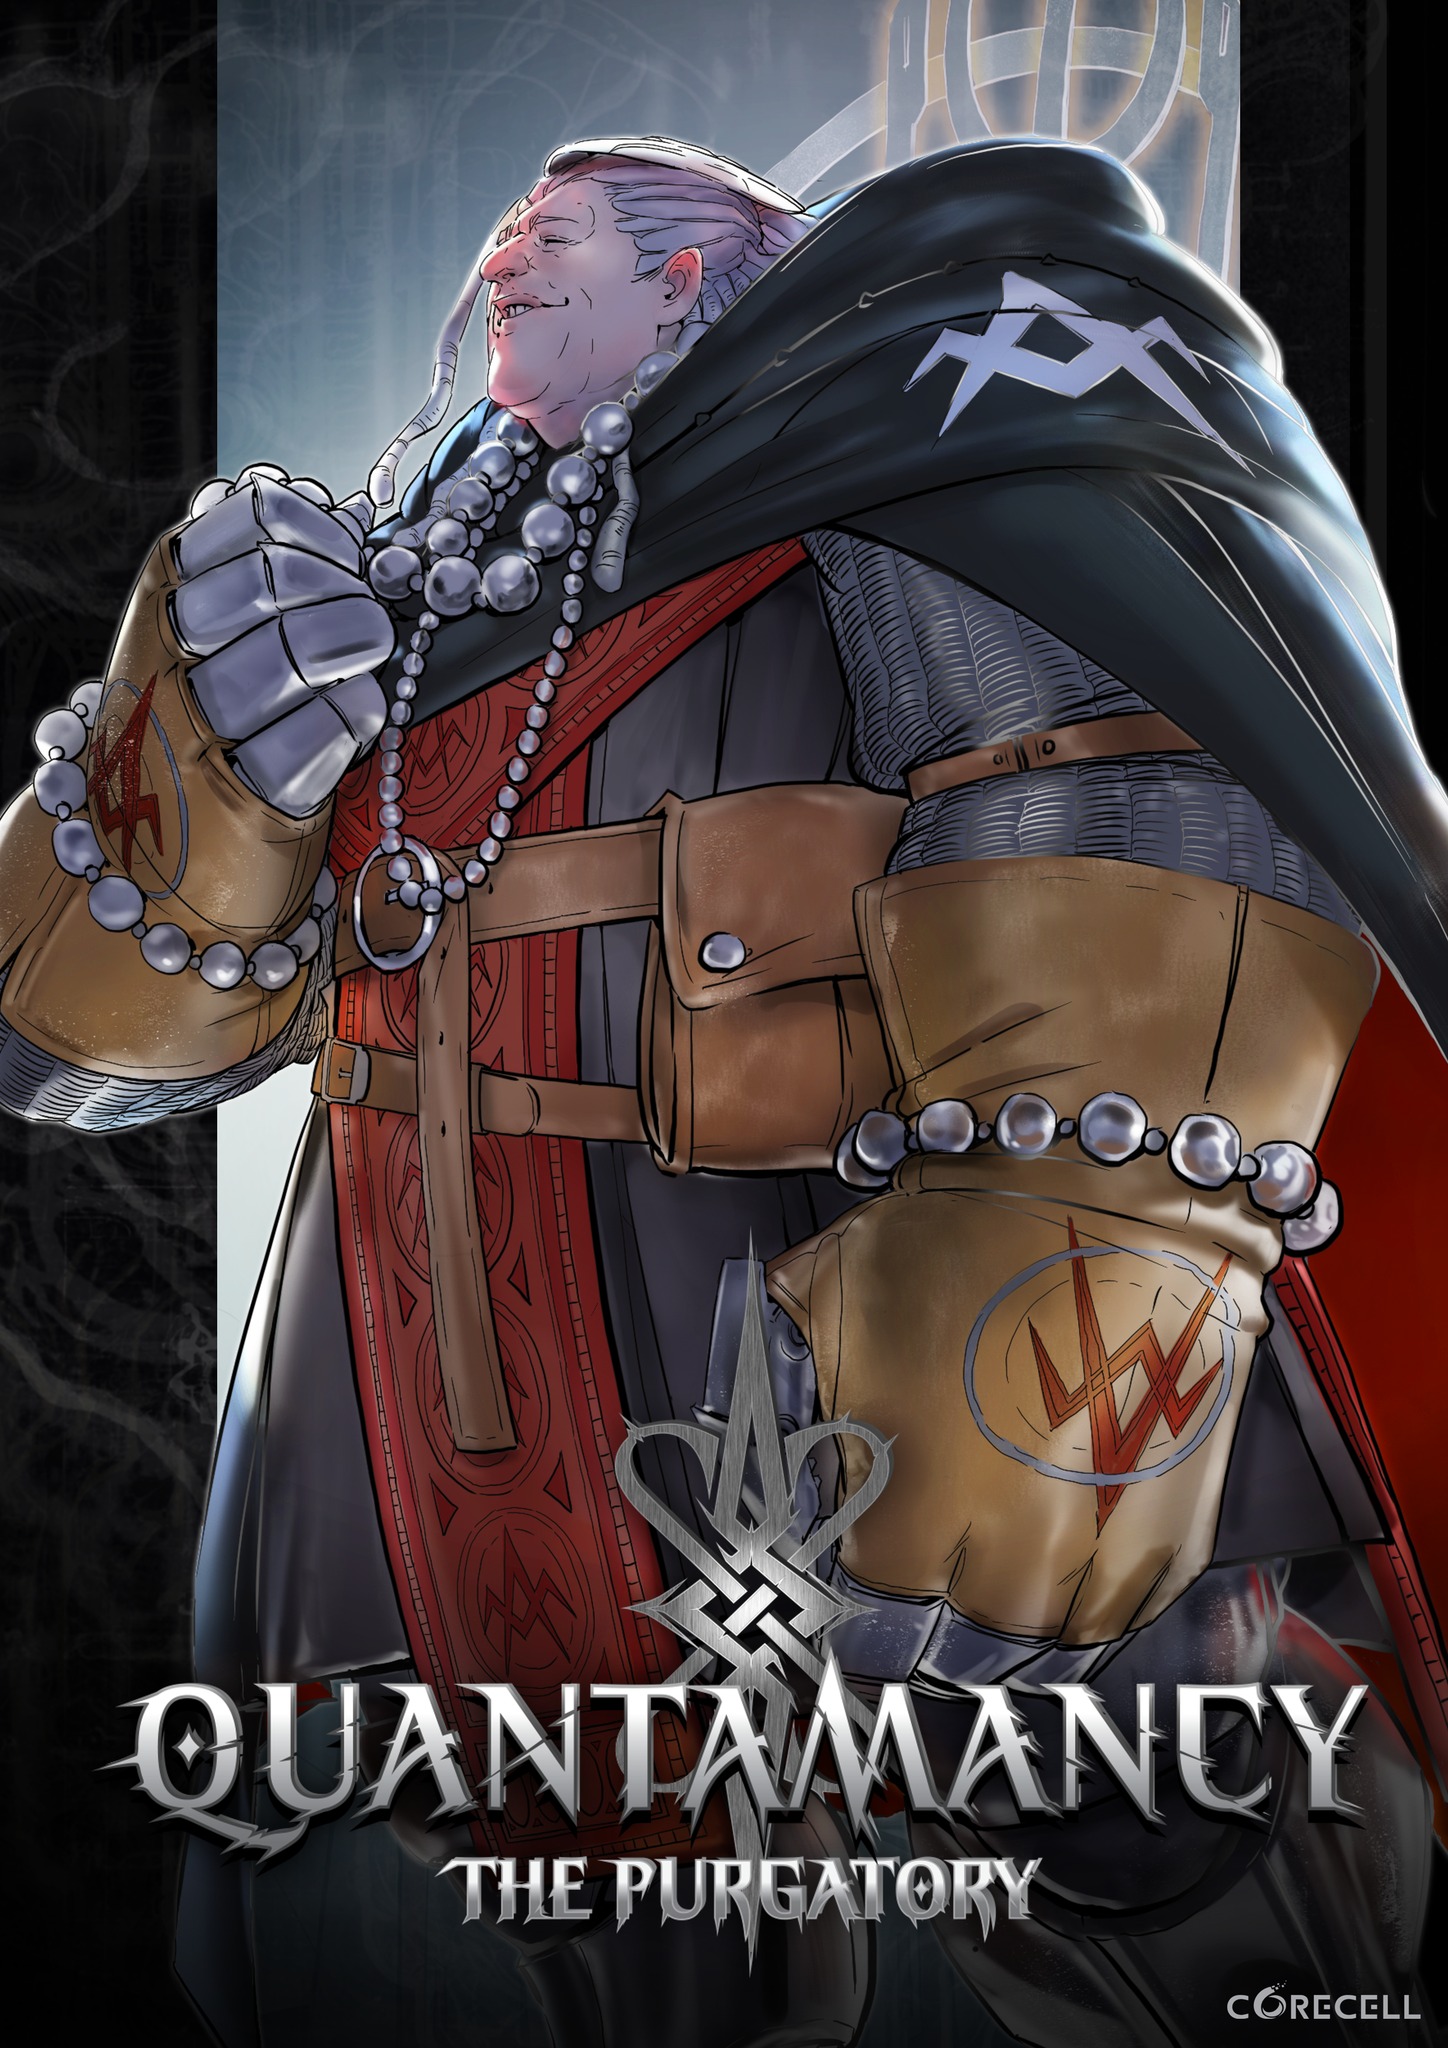 Roguelite action RPG Quantamancy: The Purgatory announced for PS5